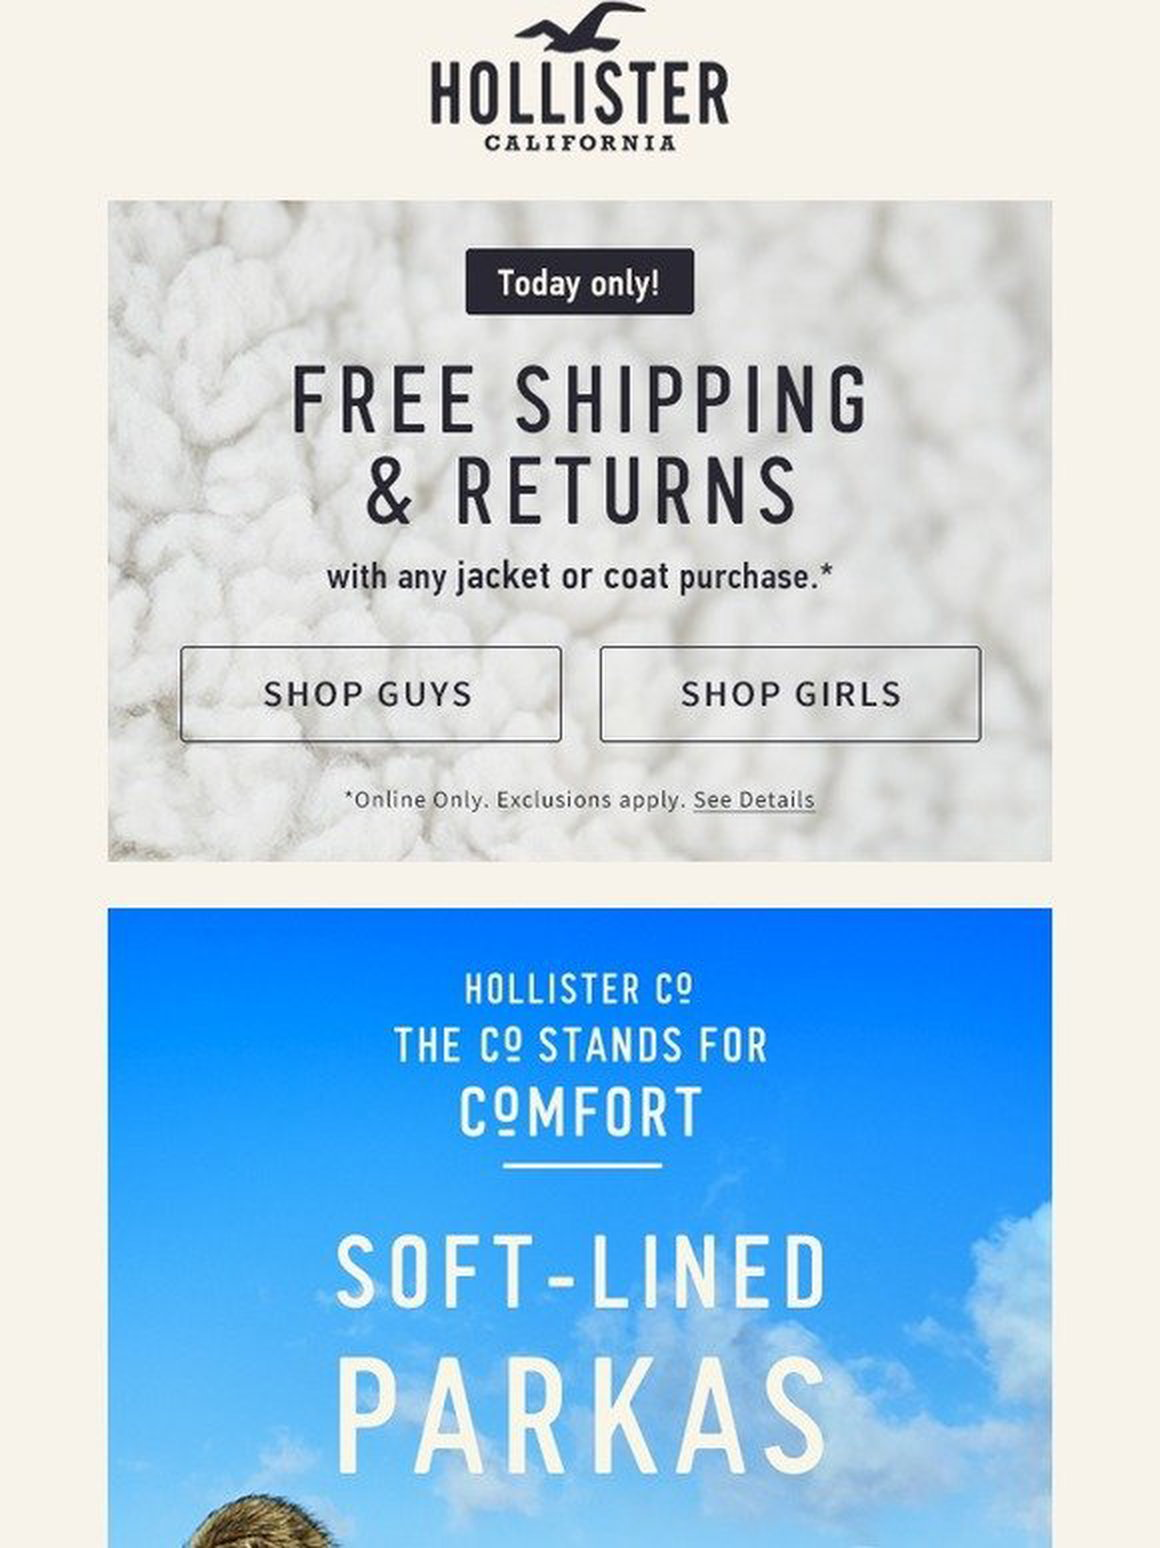 hollister returns by mail